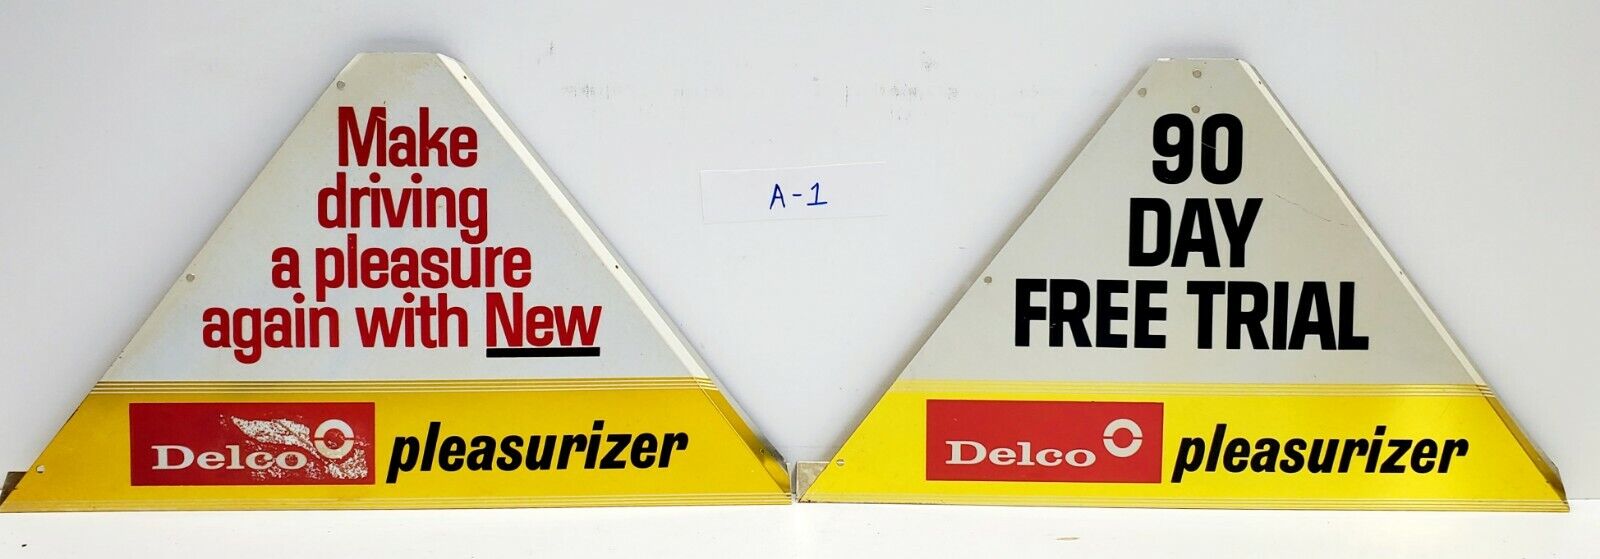 2x Vintage Delco Pleasurizer Single Sided Metal Advertising Signs Shock absorber